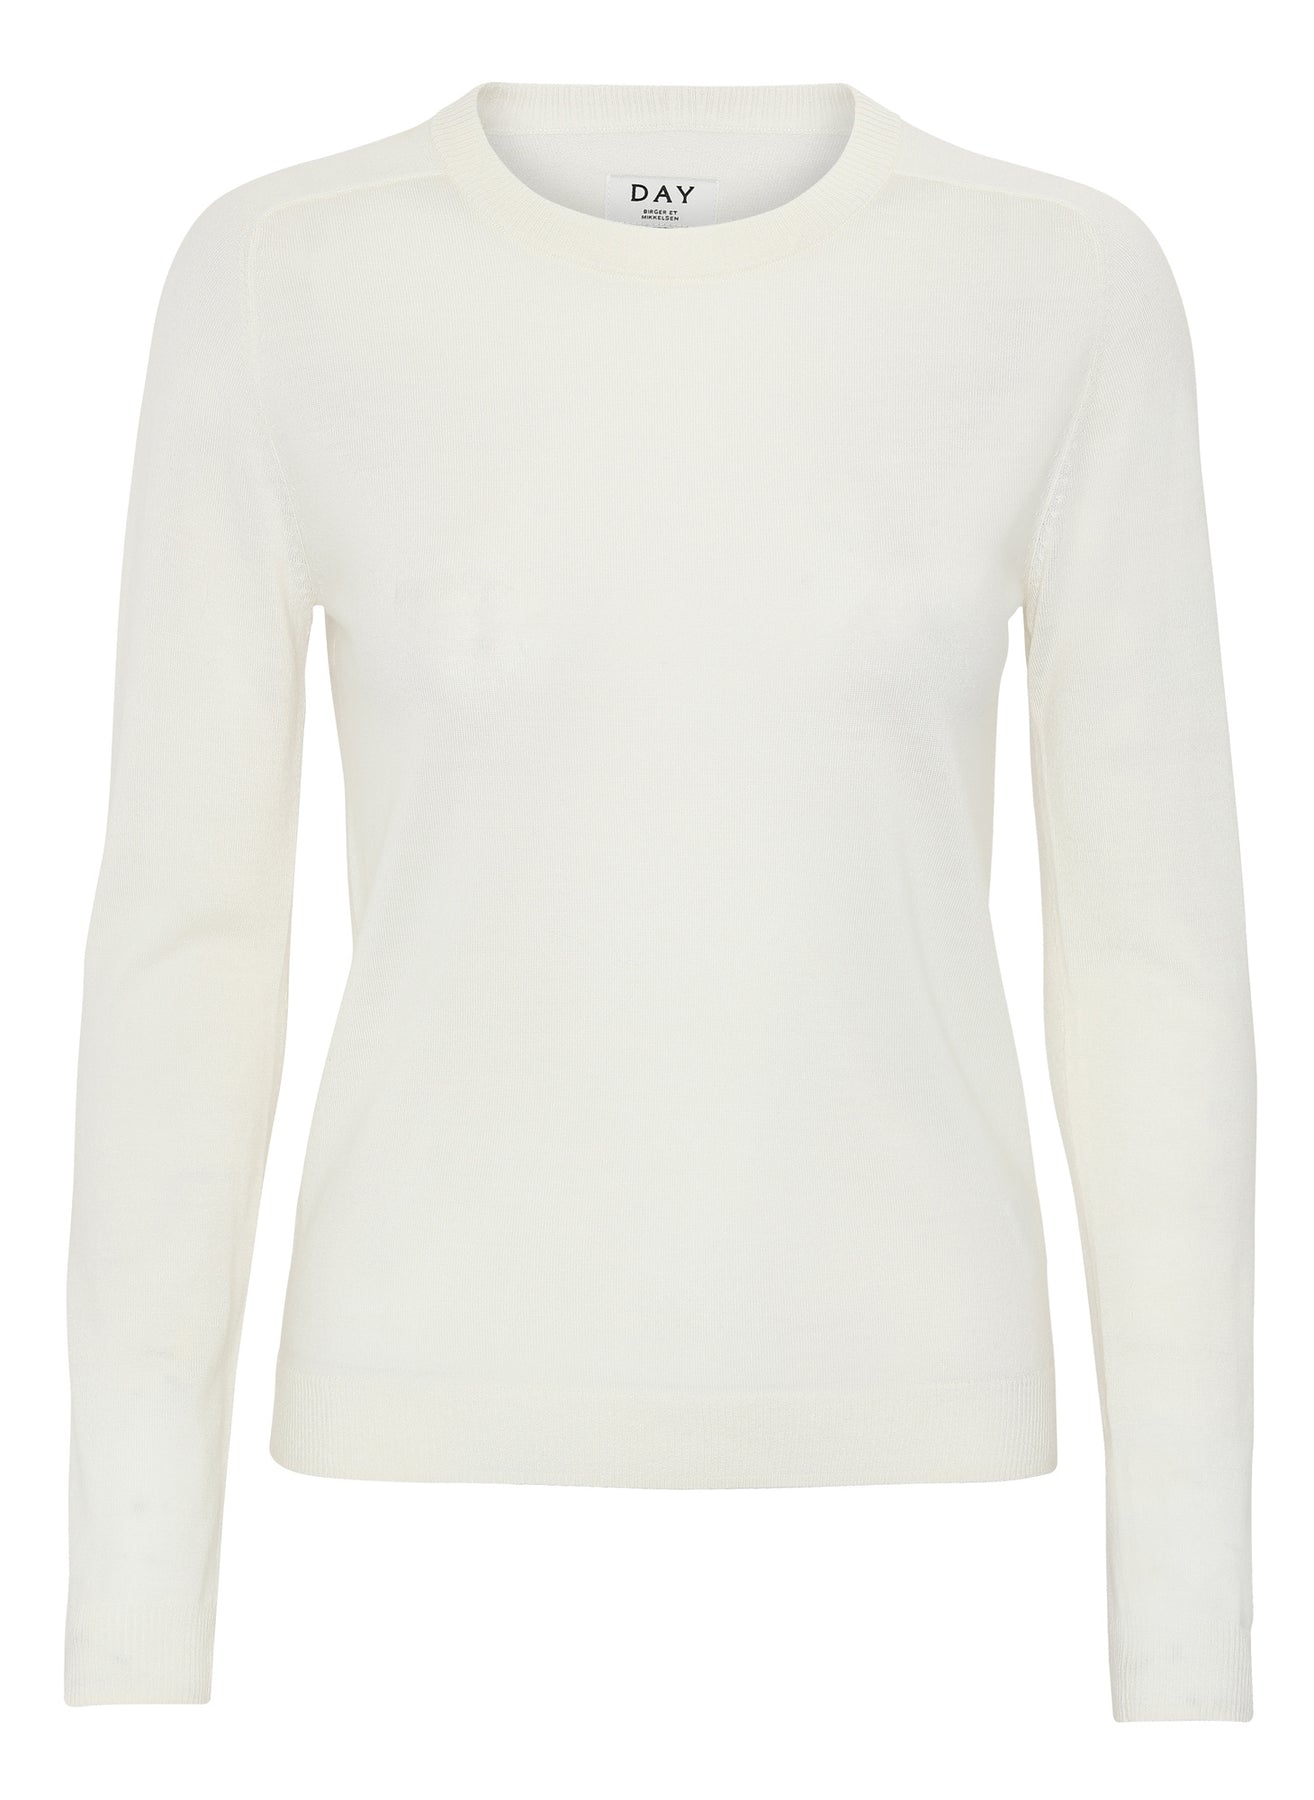 Day Whitney Sweater - Ivory Shade - DAY - Gensere - VILLOID.no